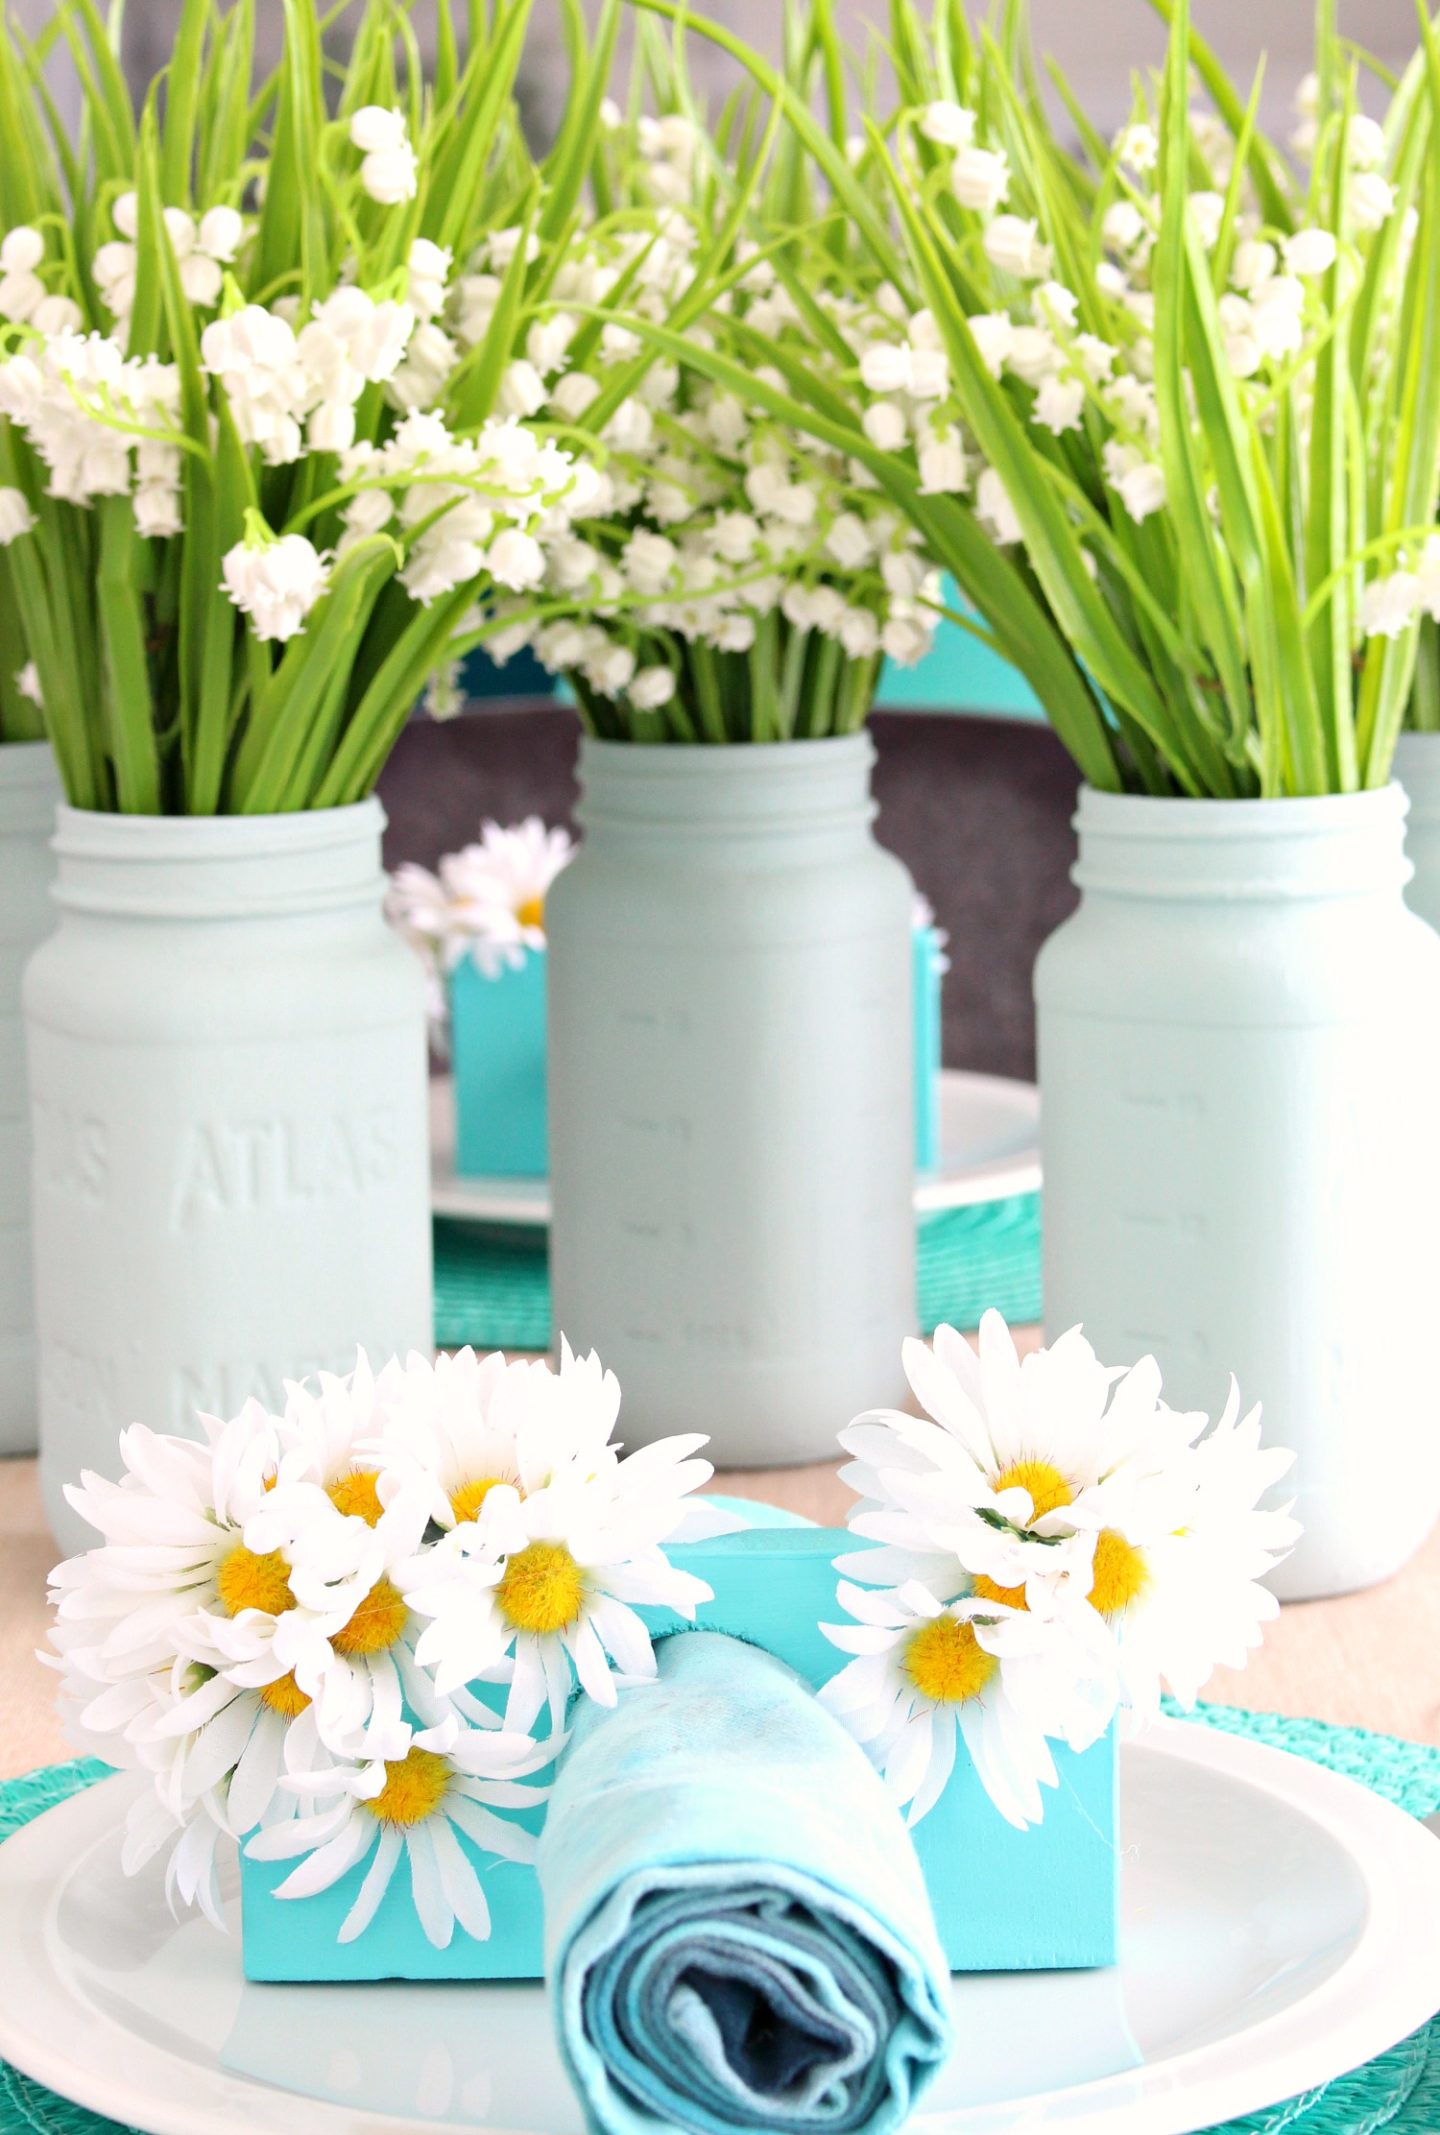 DIY Scrap Wood Napkin Rings with Daisies | Mod Faux Flower Craft